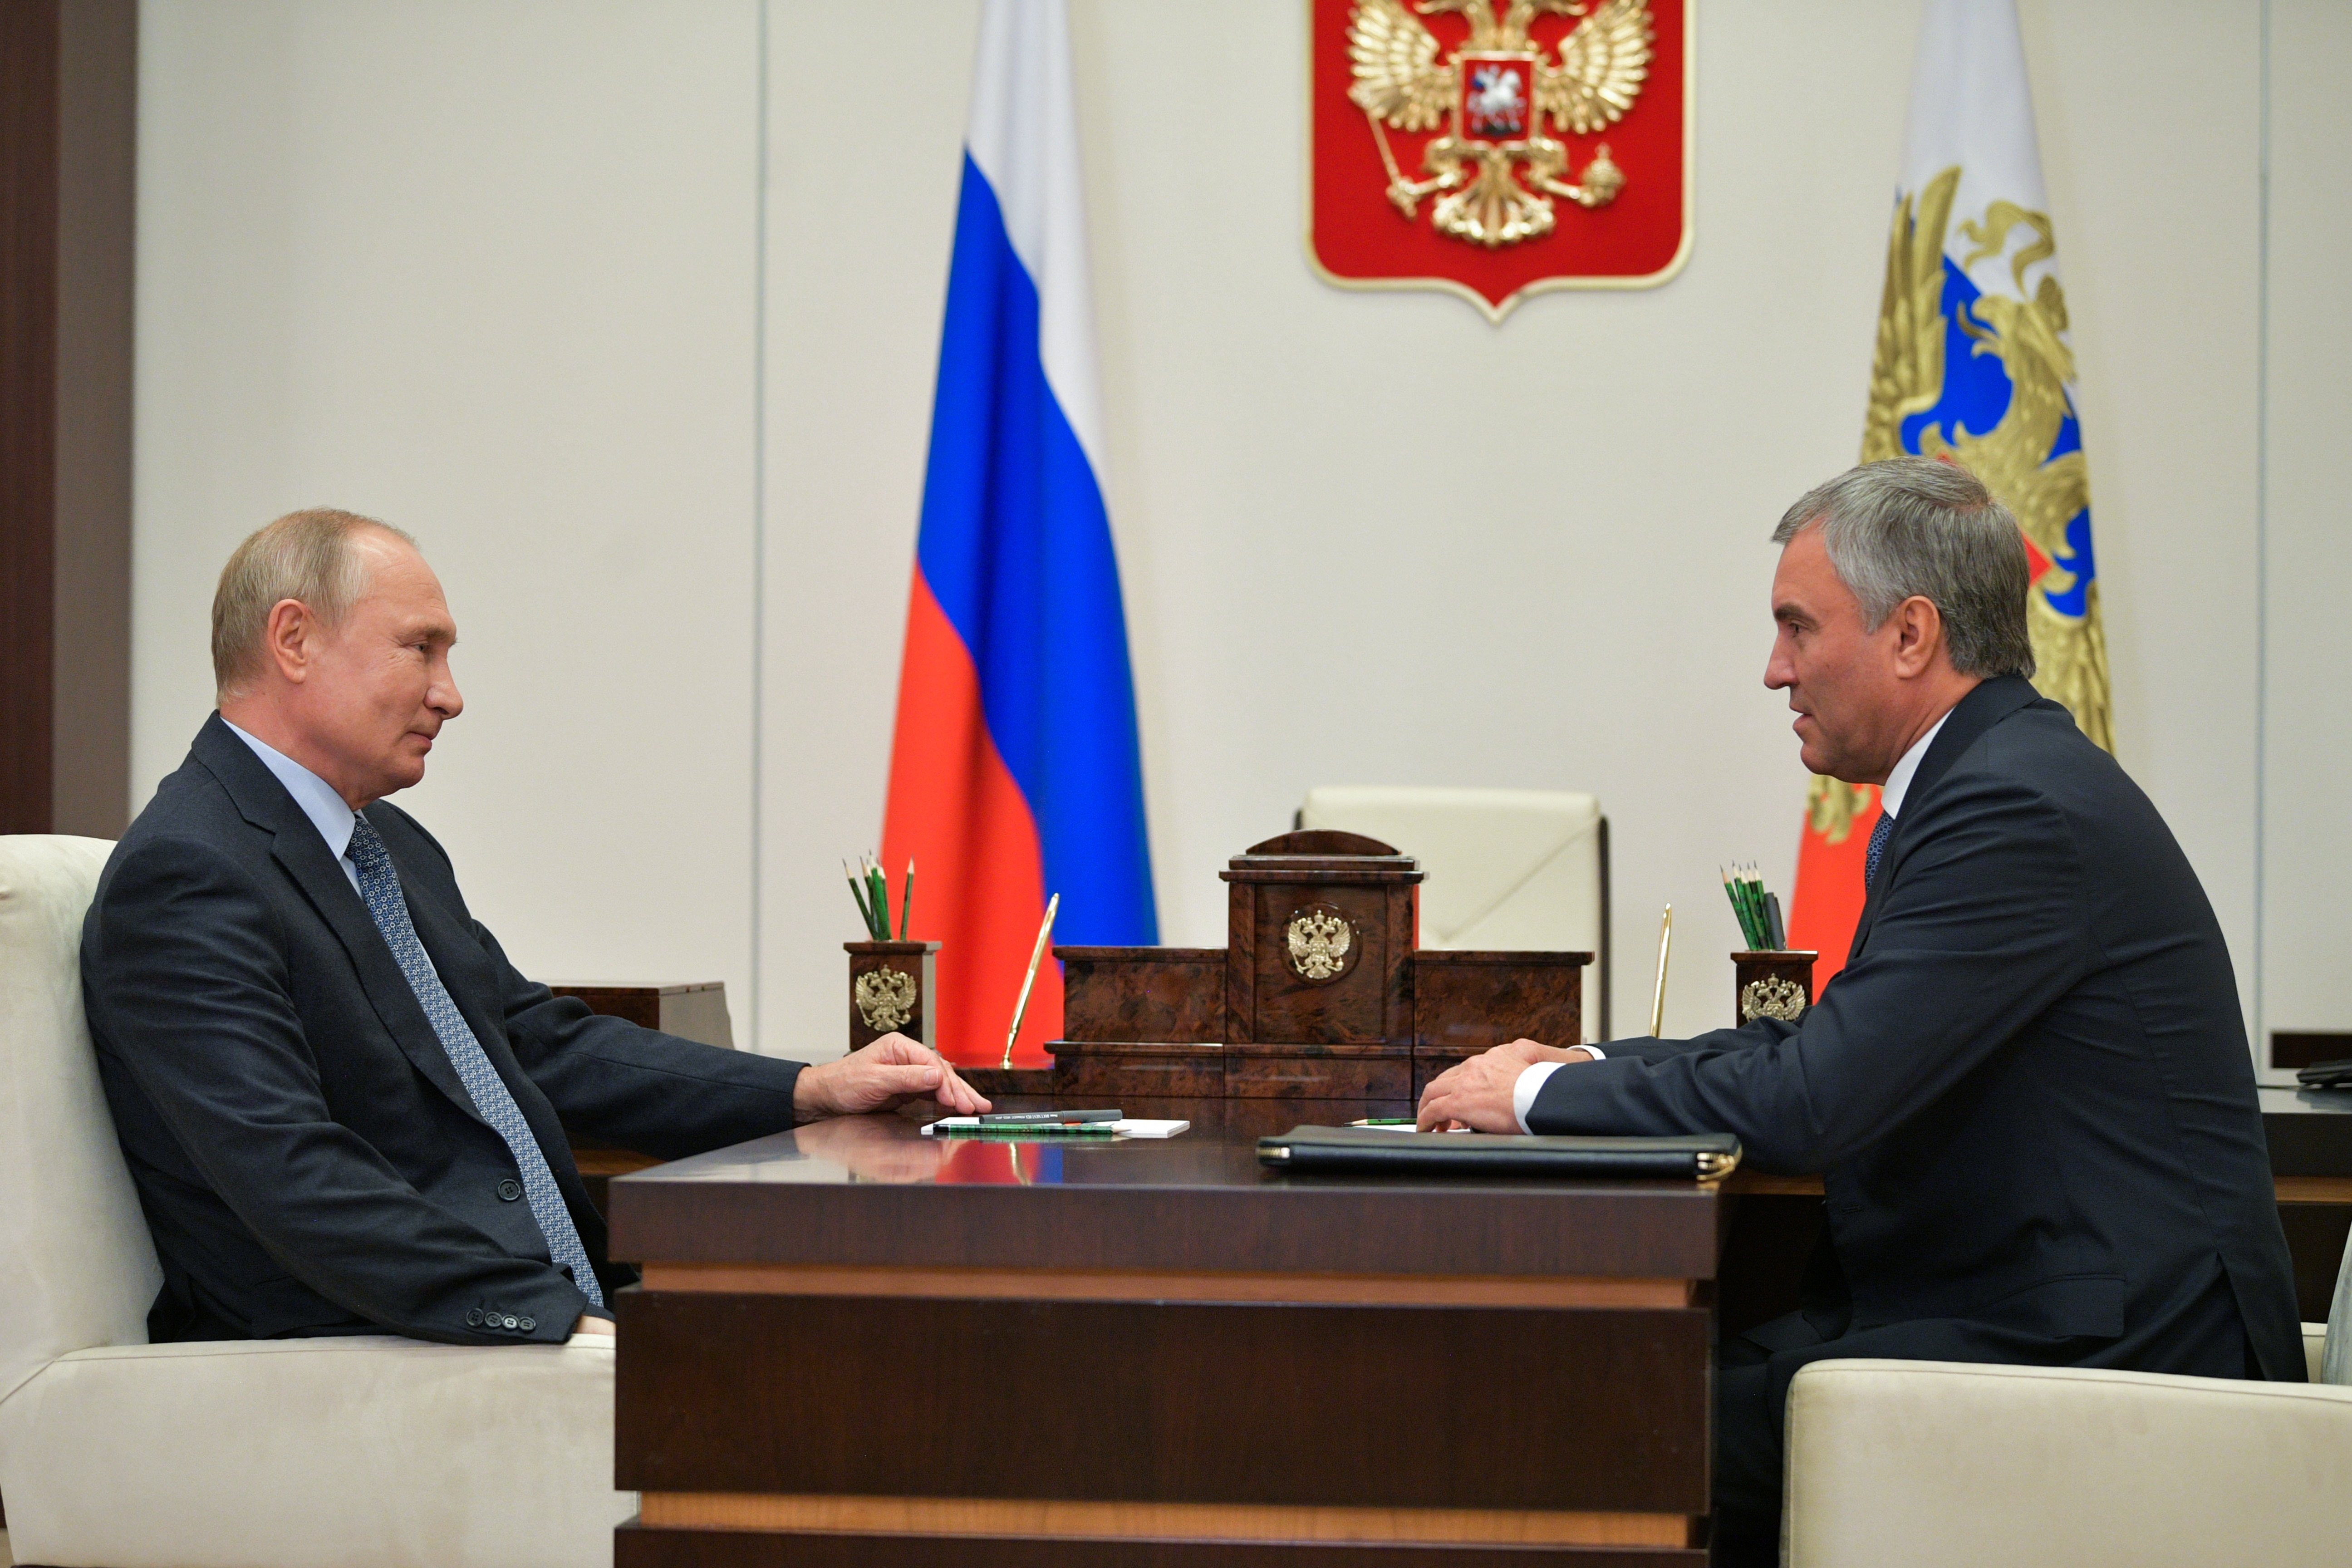 Russian President Vladimir Putin meets with State Duma Speaker Vyacheslav Volodin outside Moscow